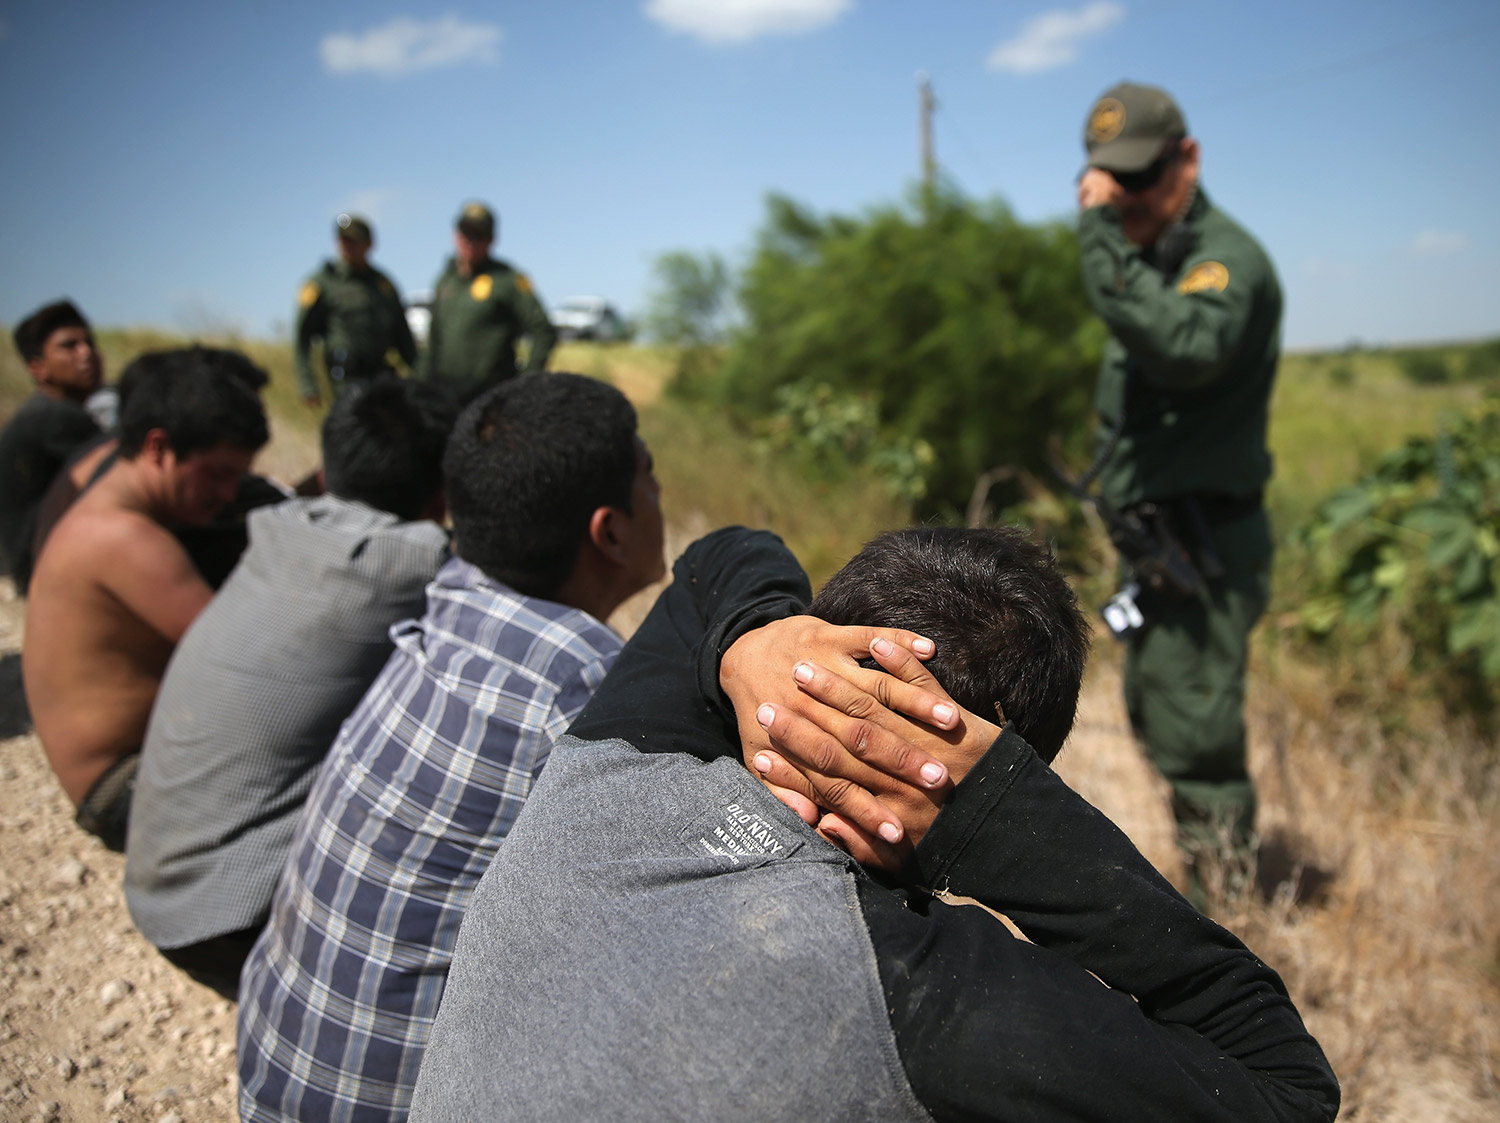 U.S. Border Patrol agents detain undocumented immigrants after they crossed the border from Mexico into the United States on August 7, 2015 in McAllen, Texas.